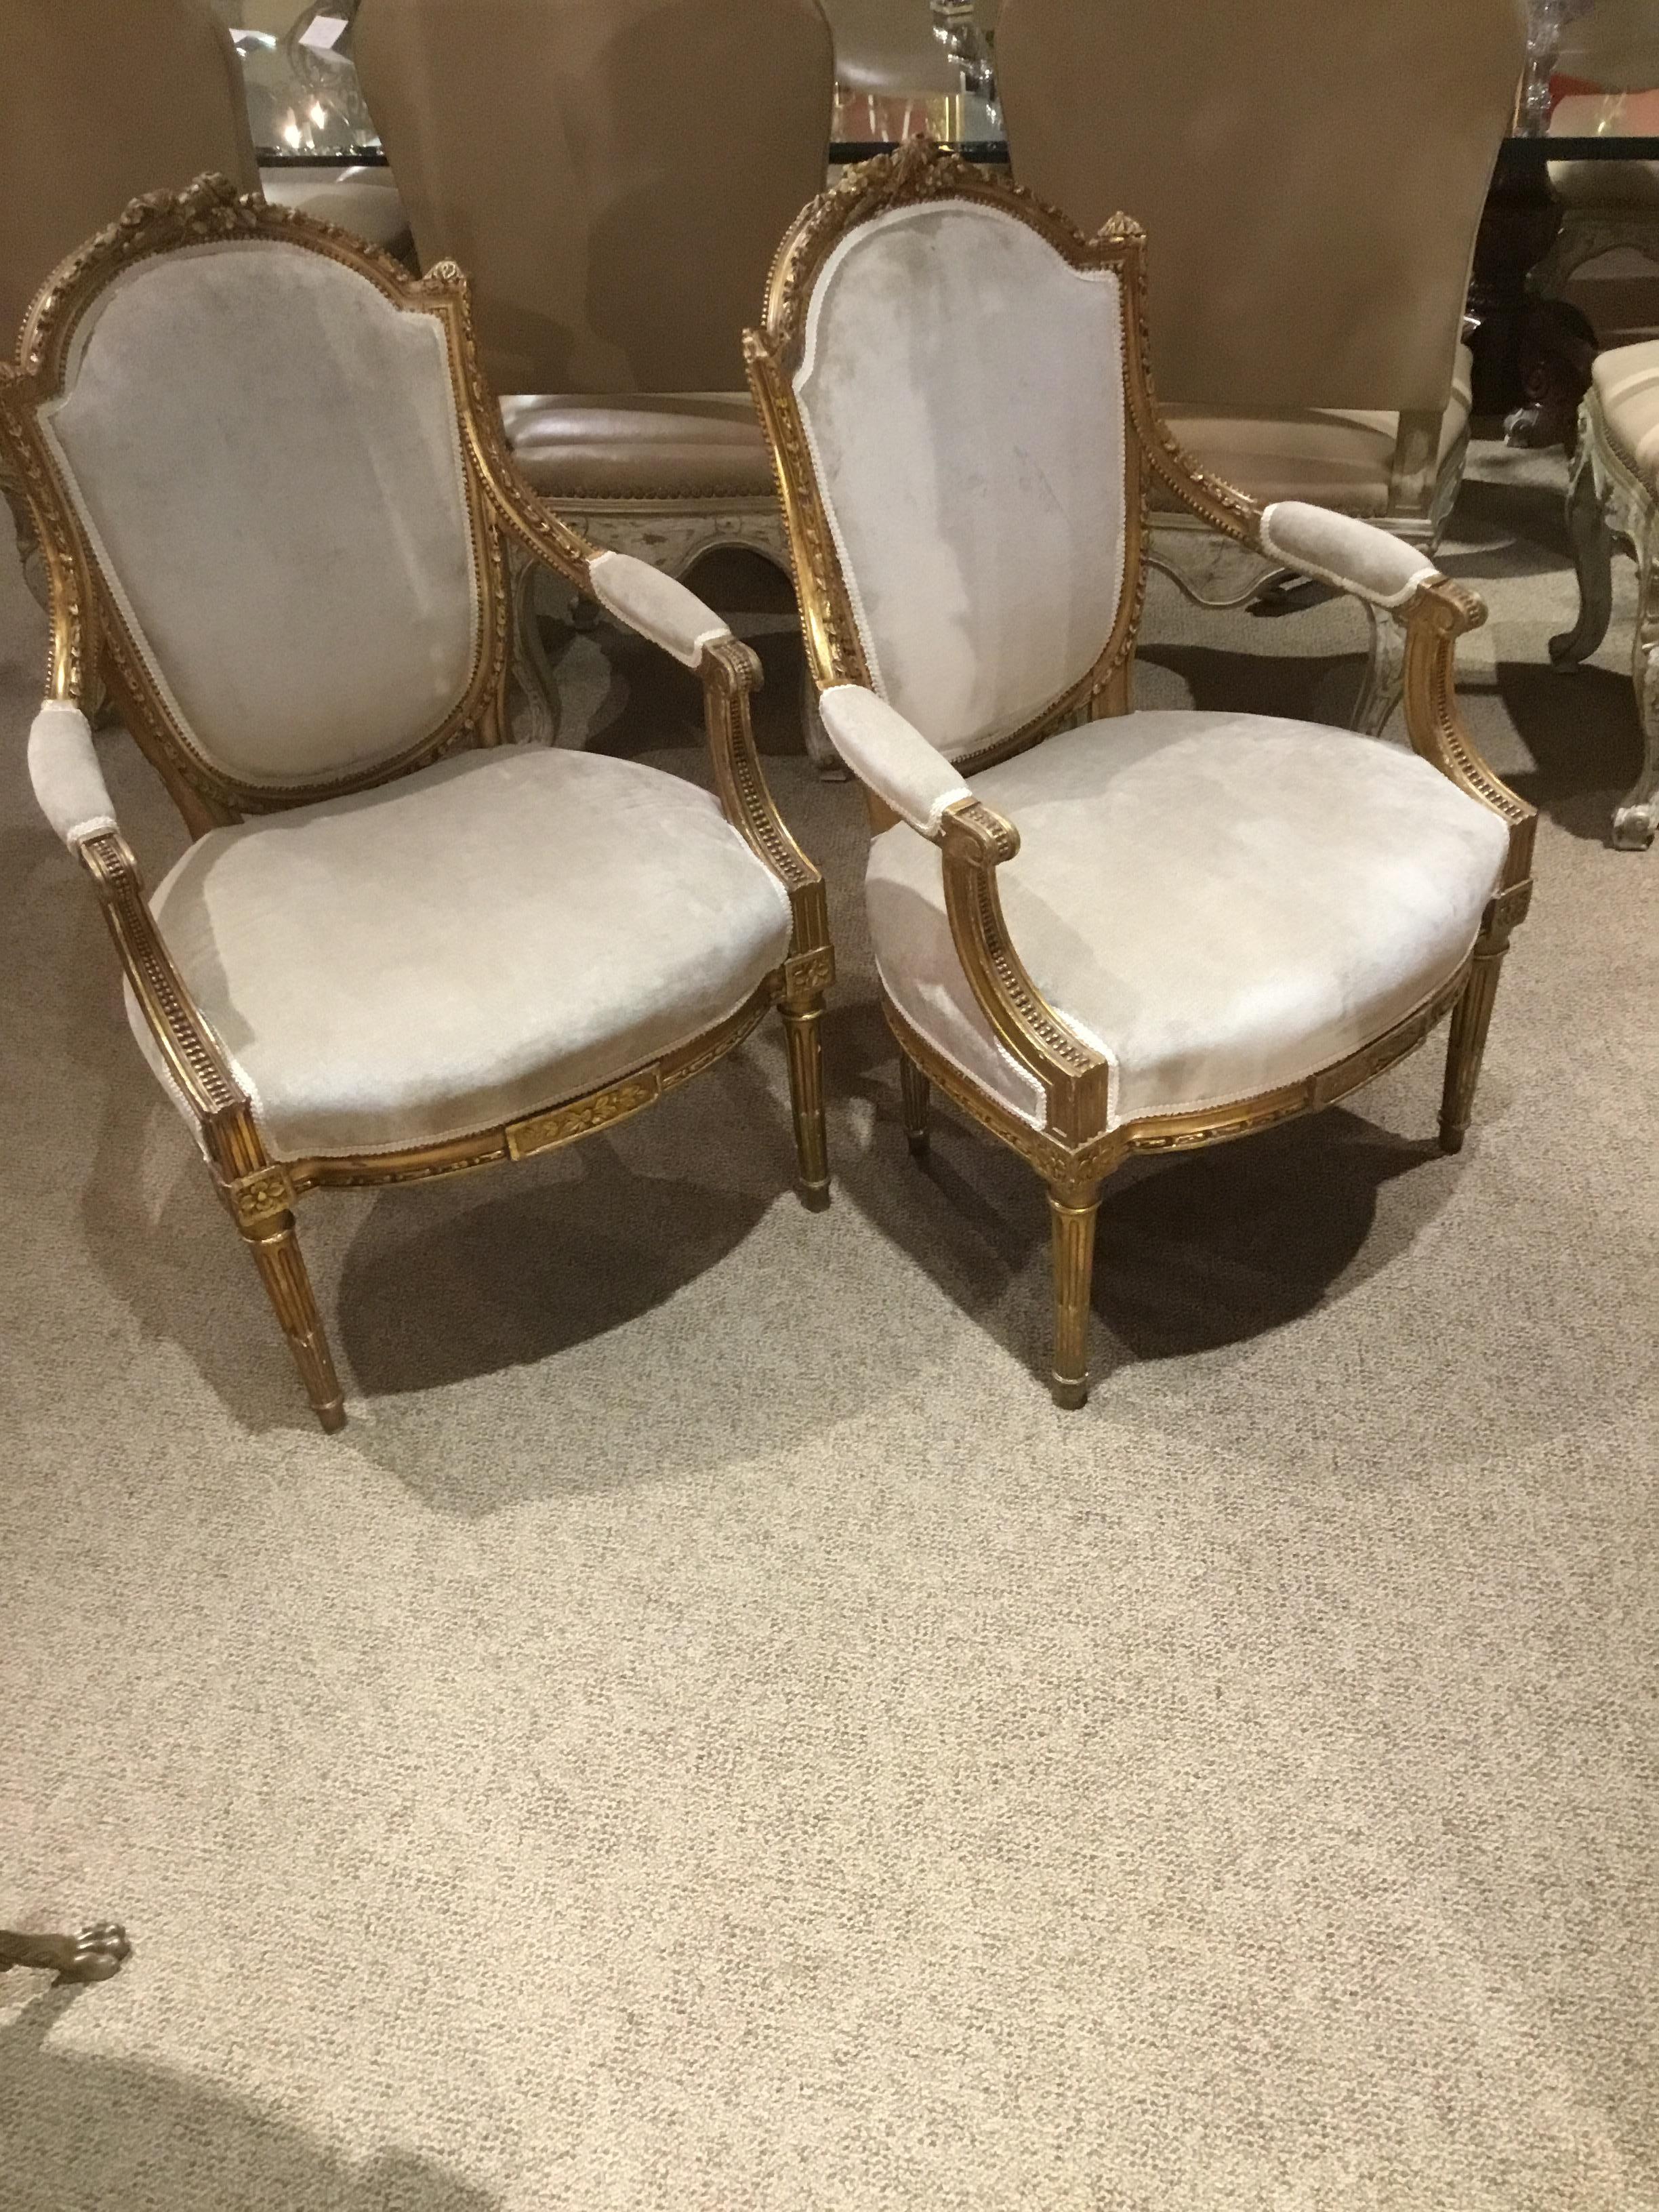 Pair of French Louis XVI Style Giltwood Chairs with New Cream Upholstery For Sale 1